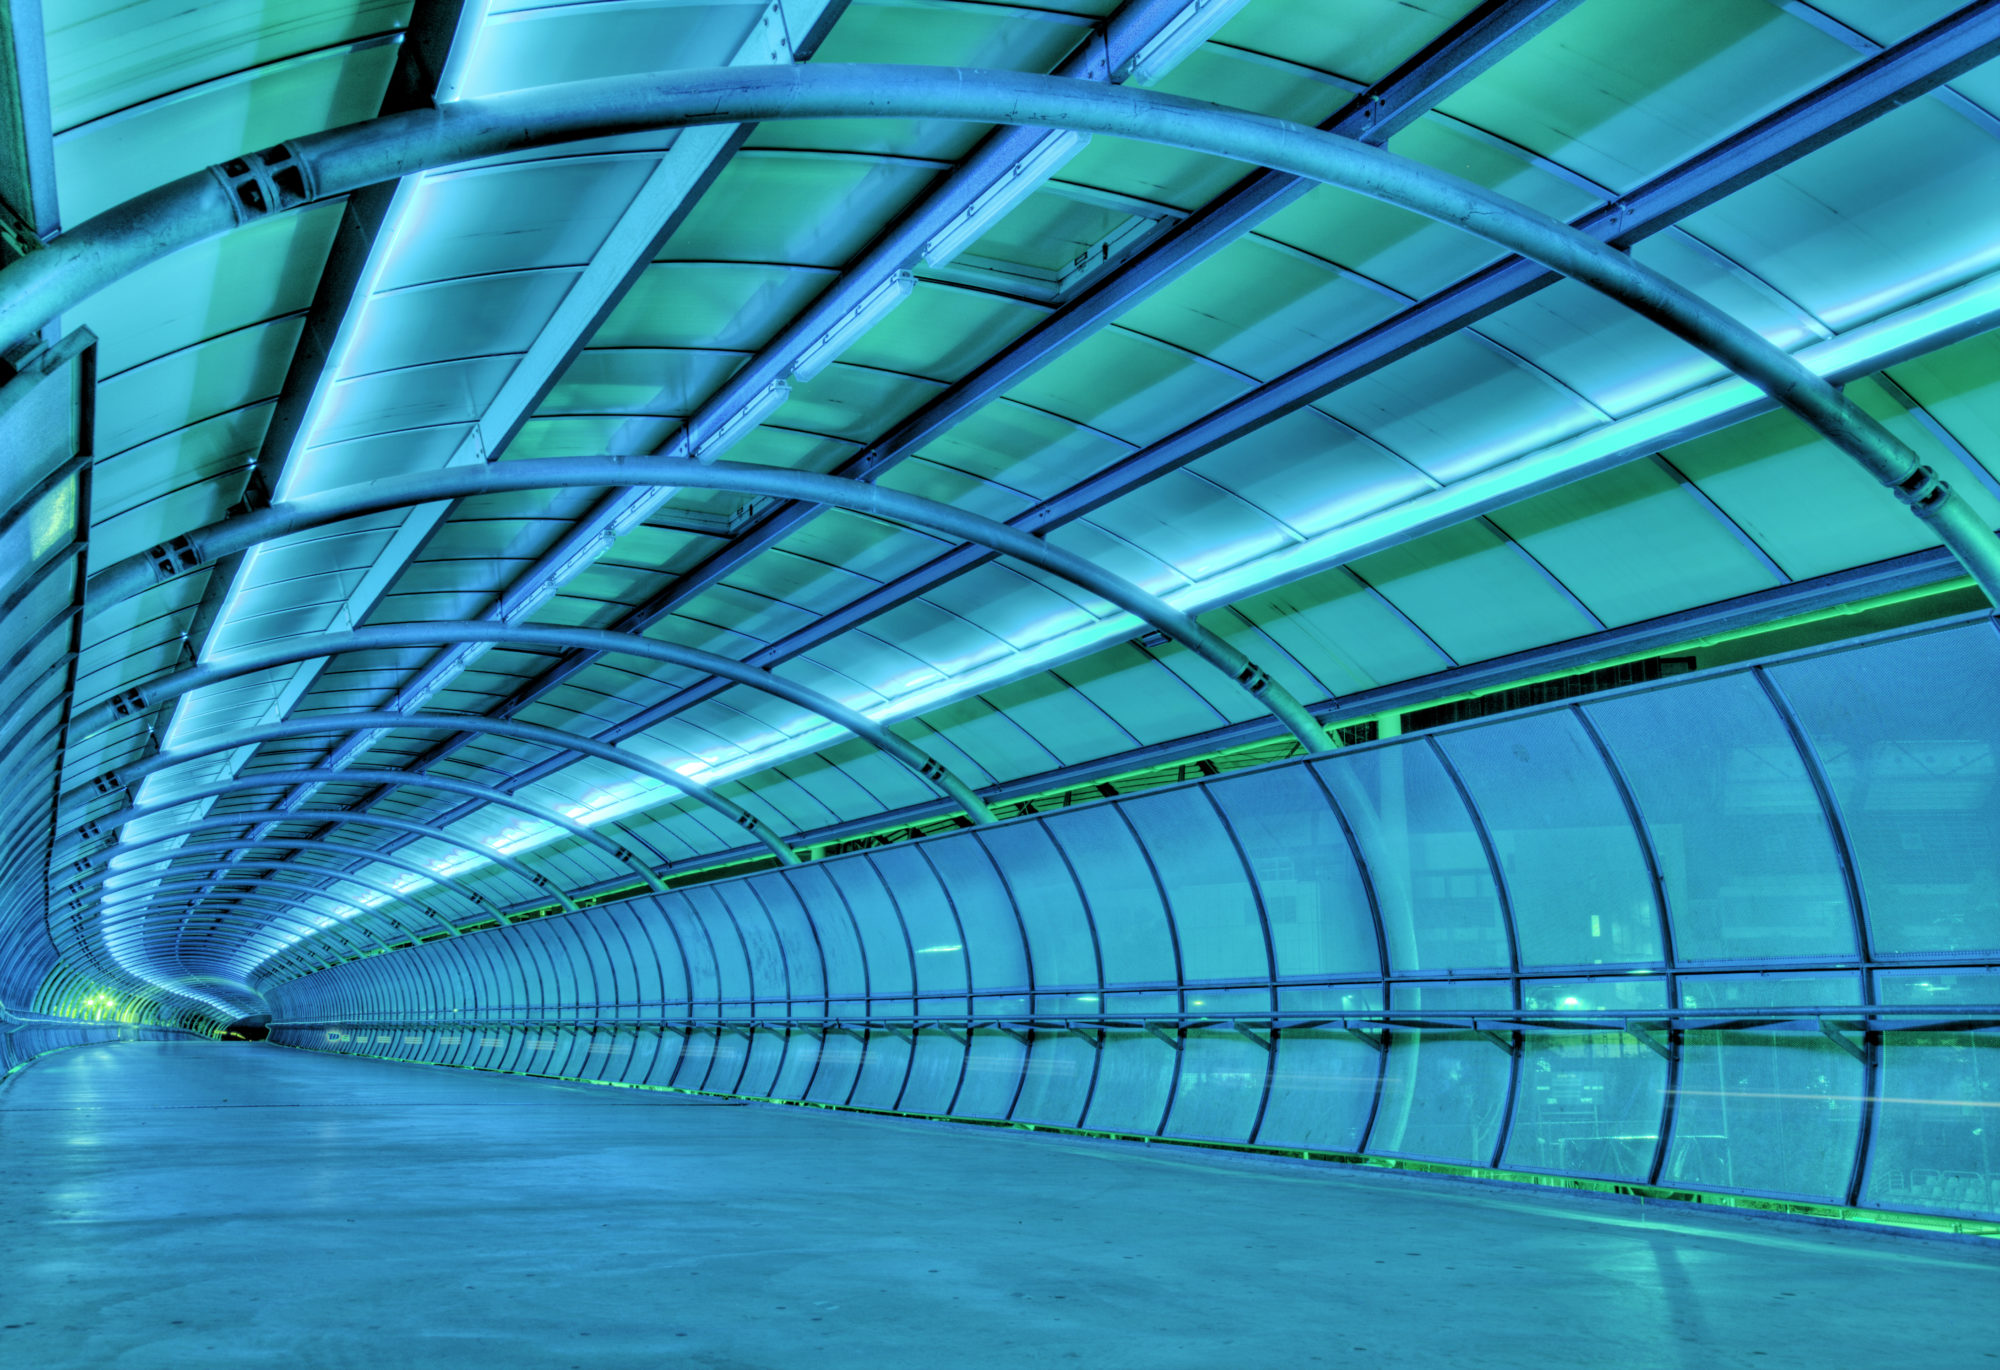 A lit-up view of an innovating tunnel of next generation